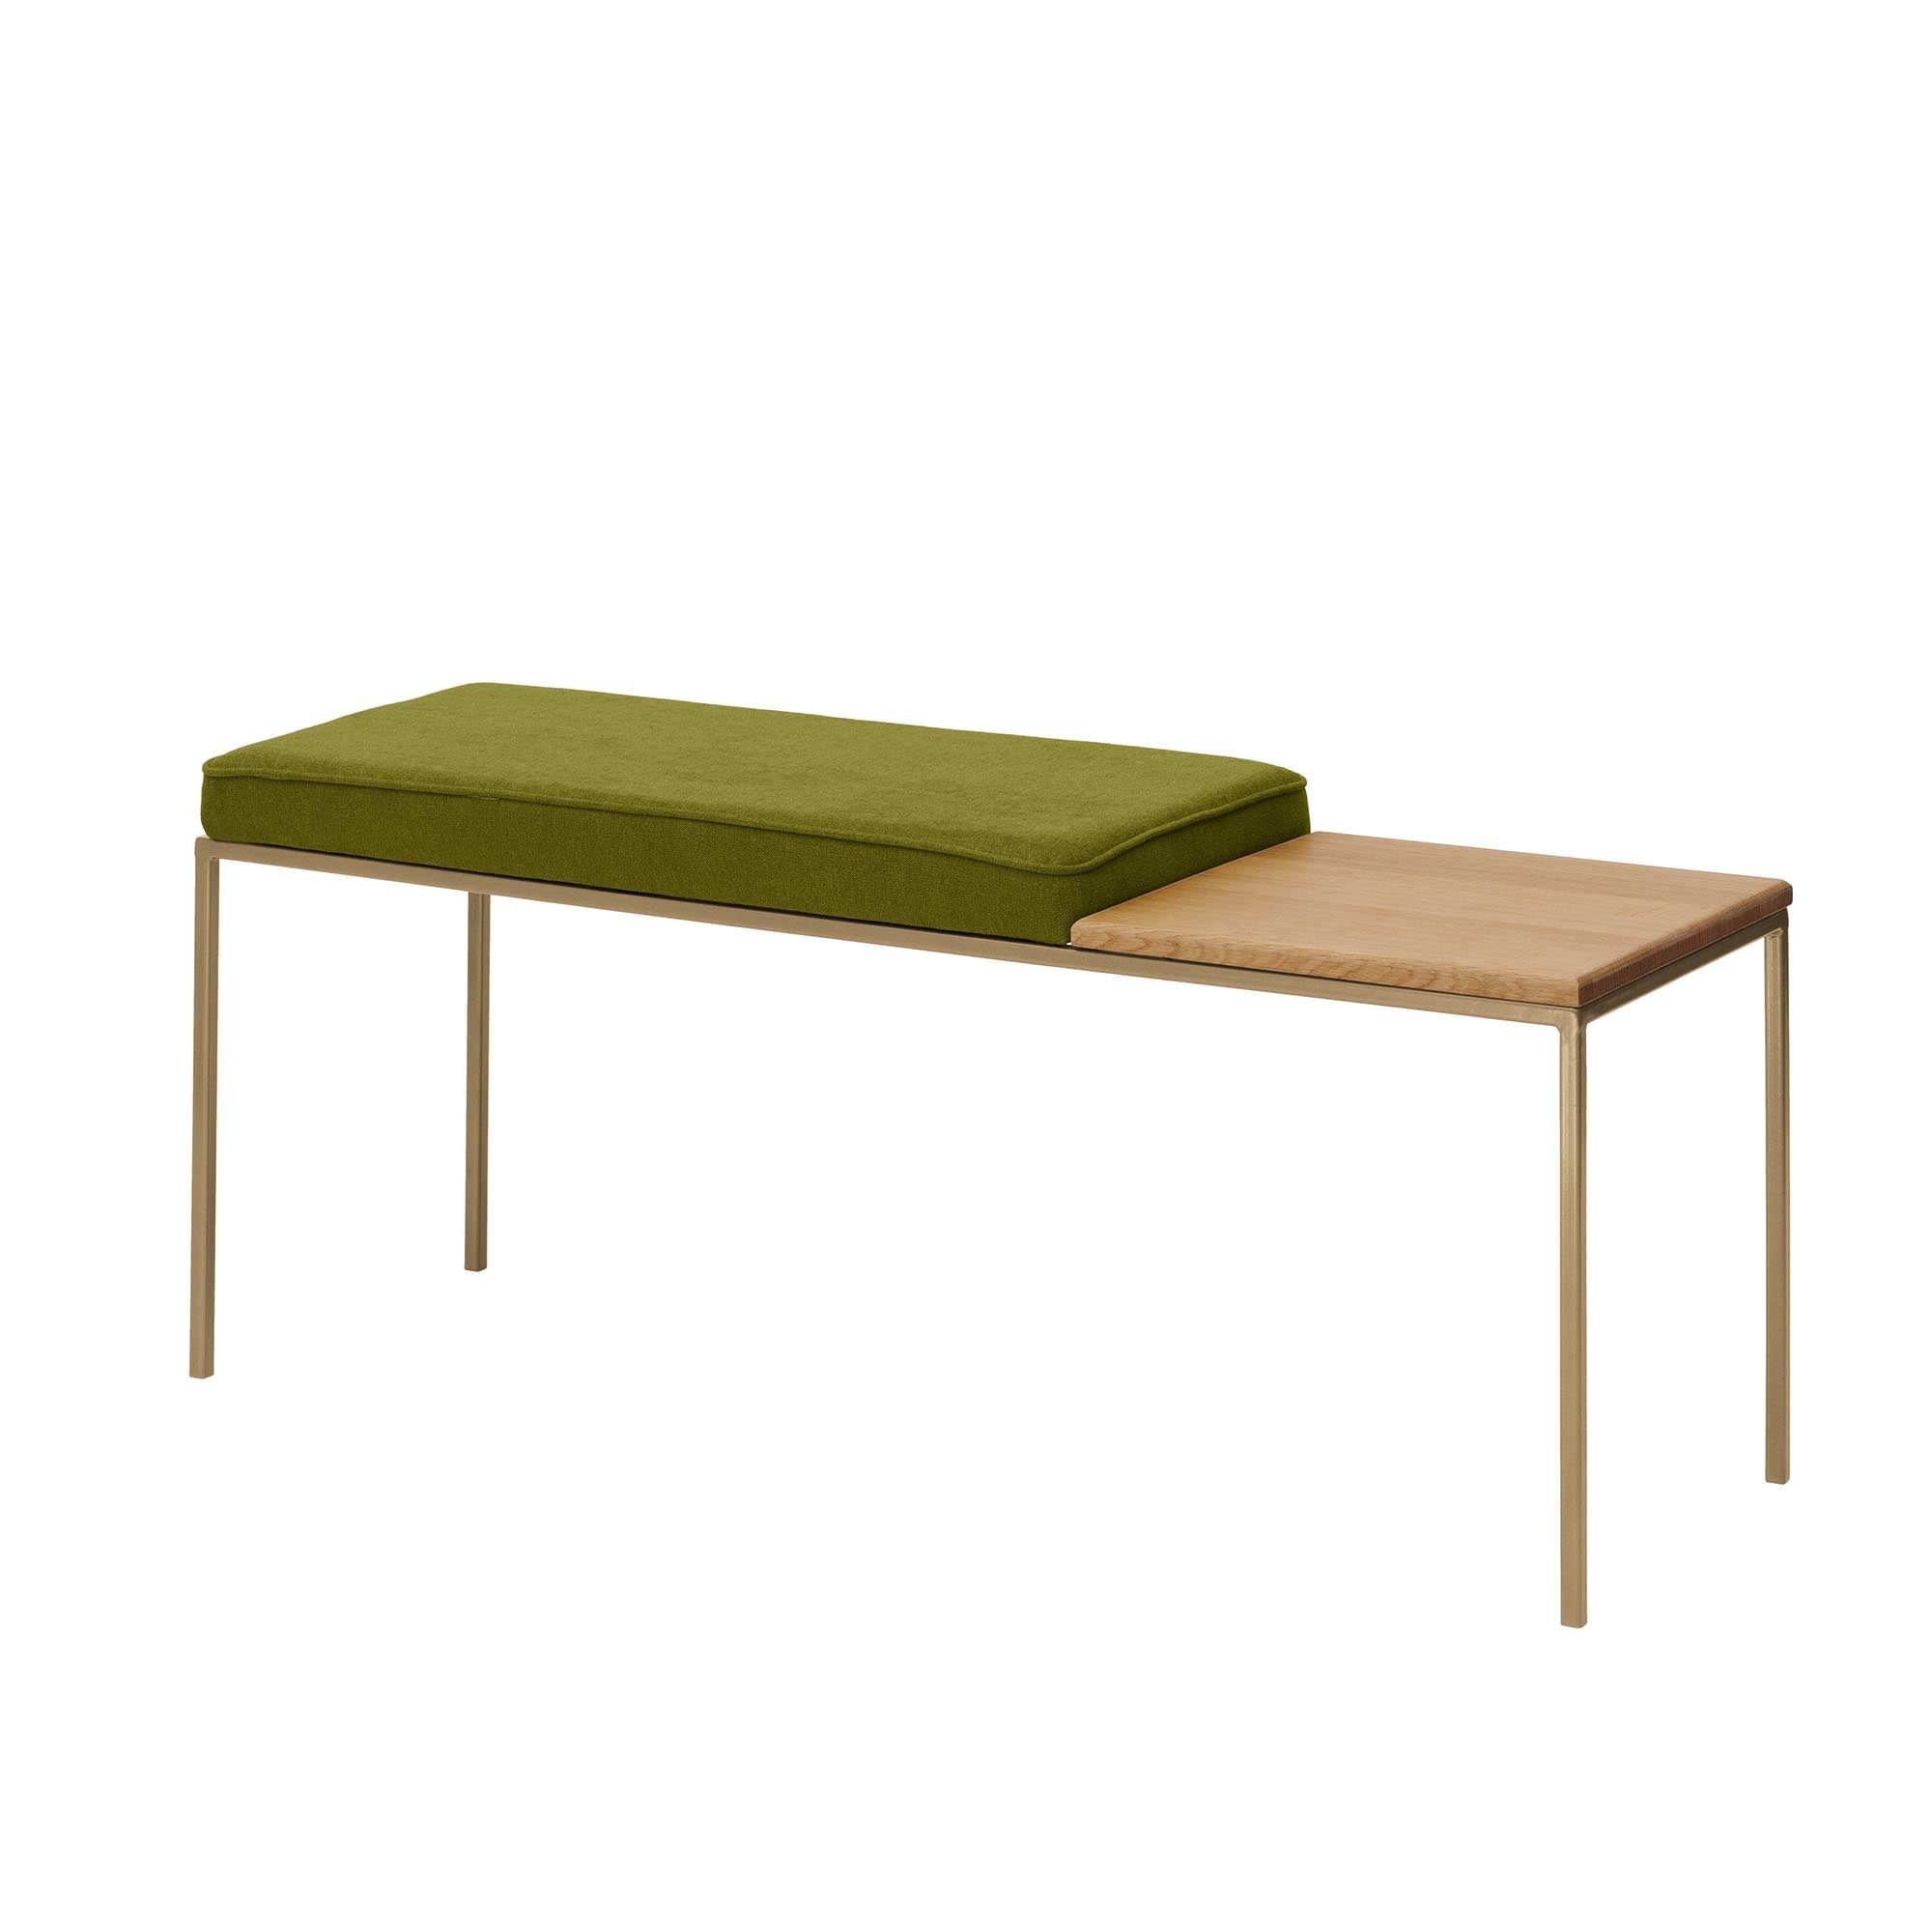 Oak Wood Seat, Natural Colour green fabric, yellow frame, half-side view